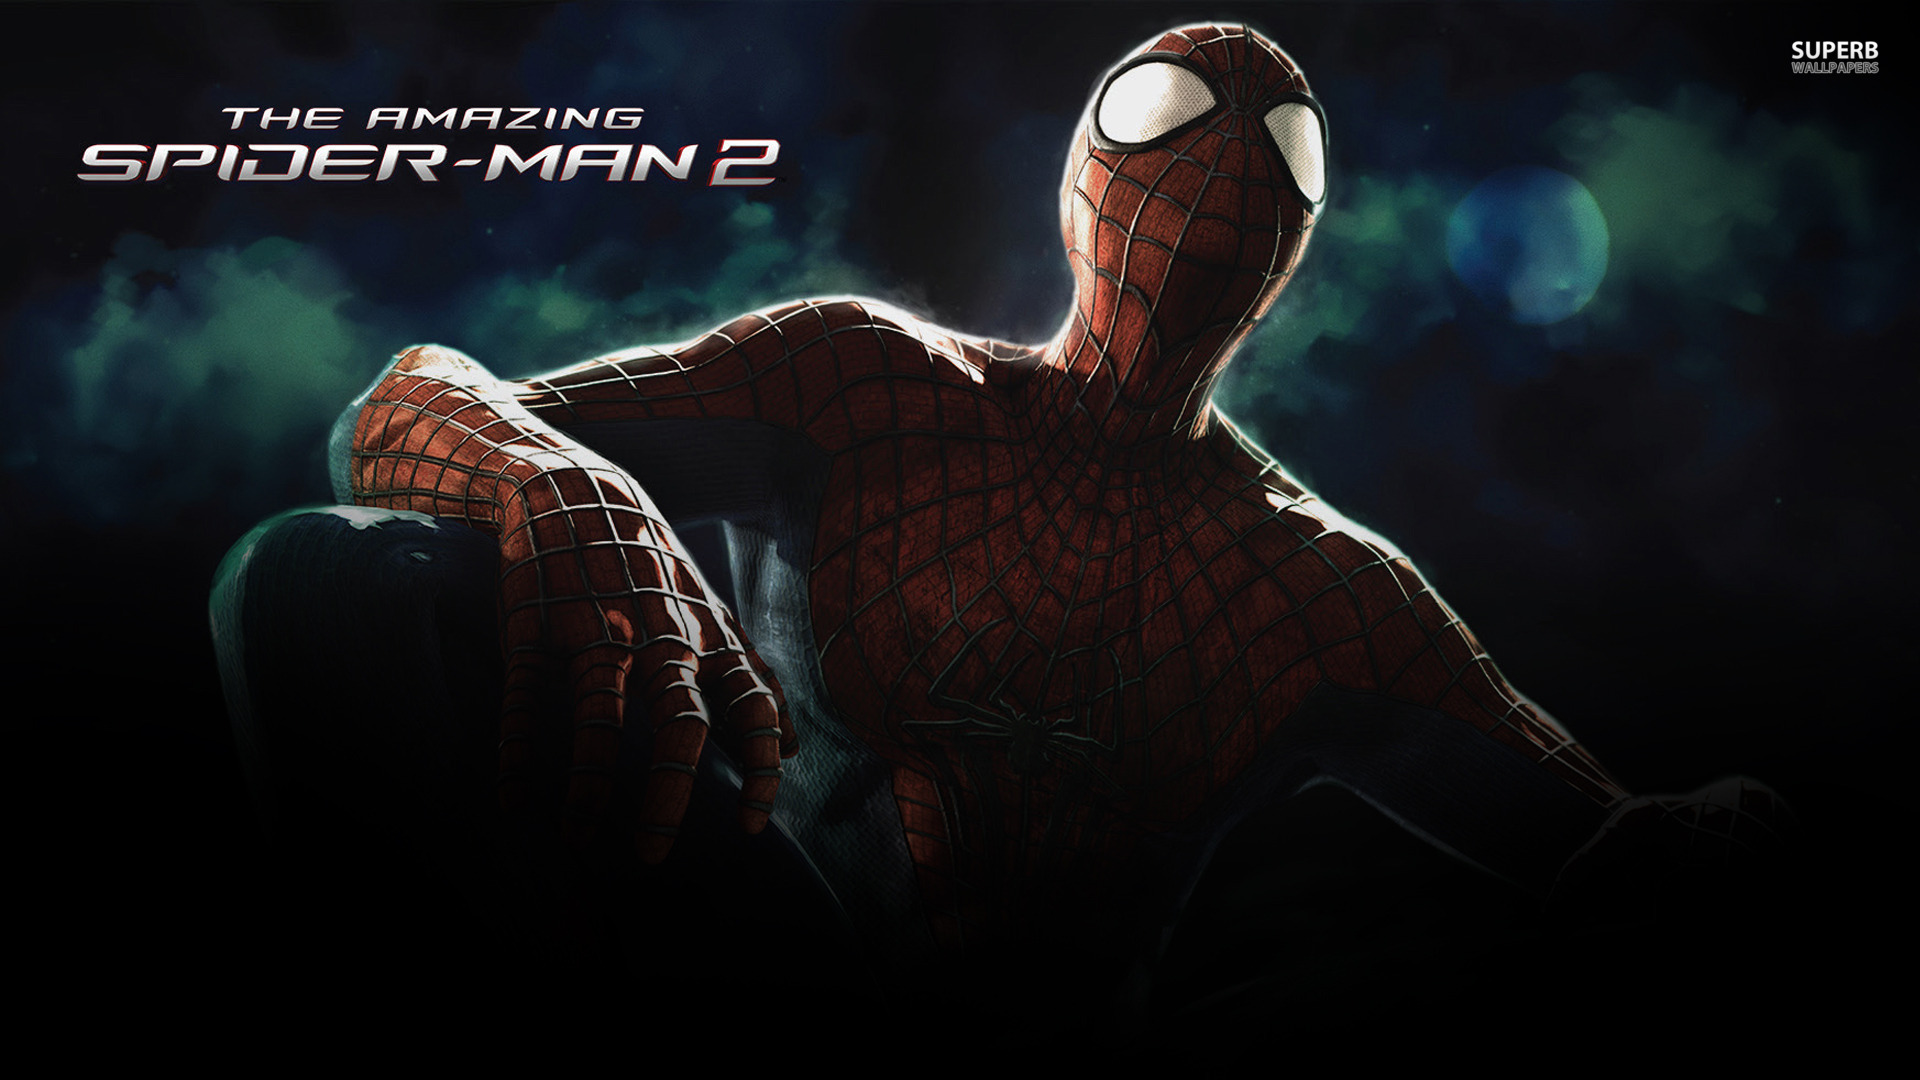 15 The Amazing Spider Man 2 wallpaperMovie wallpapers#26293 297 ...